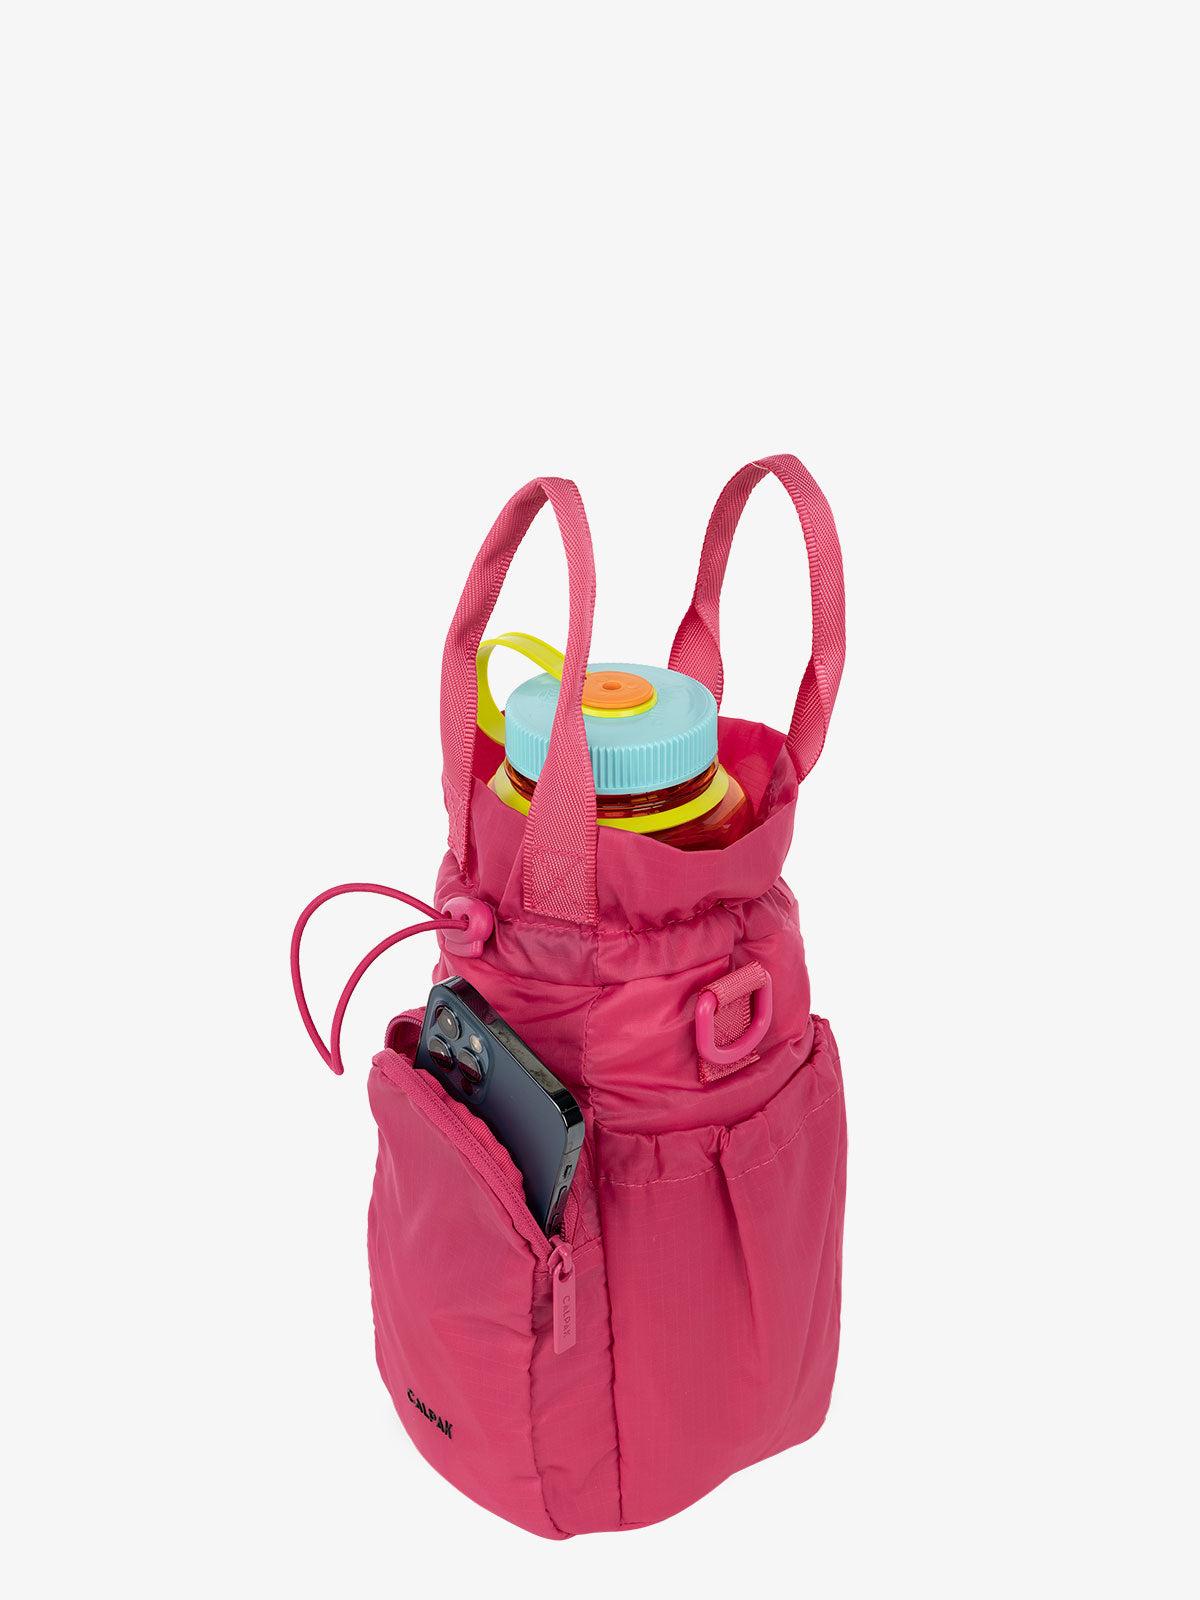 CALPAK Water Bottle carrier with zippered pocket in pink